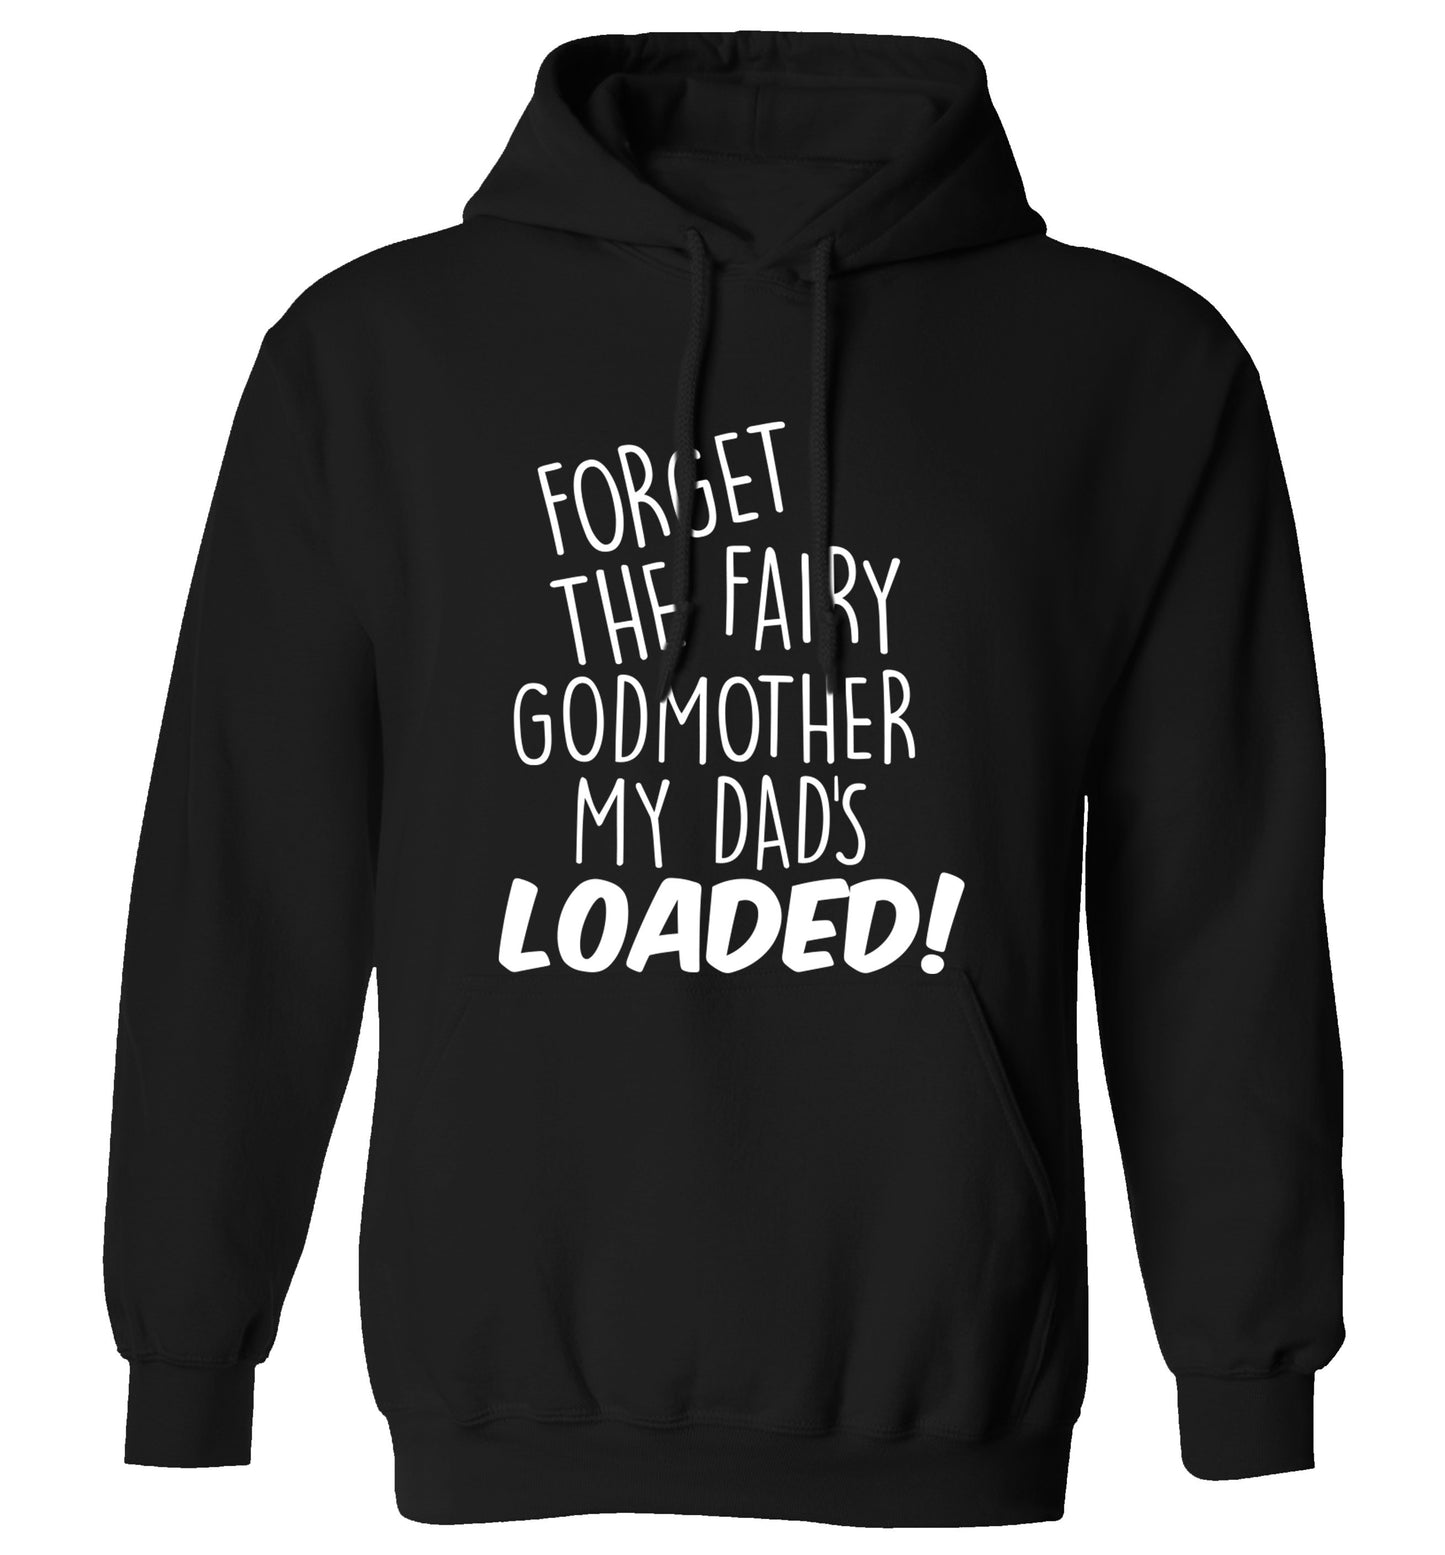 Forget the fairy godmother my dad's loaded adults unisex black hoodie 2XL